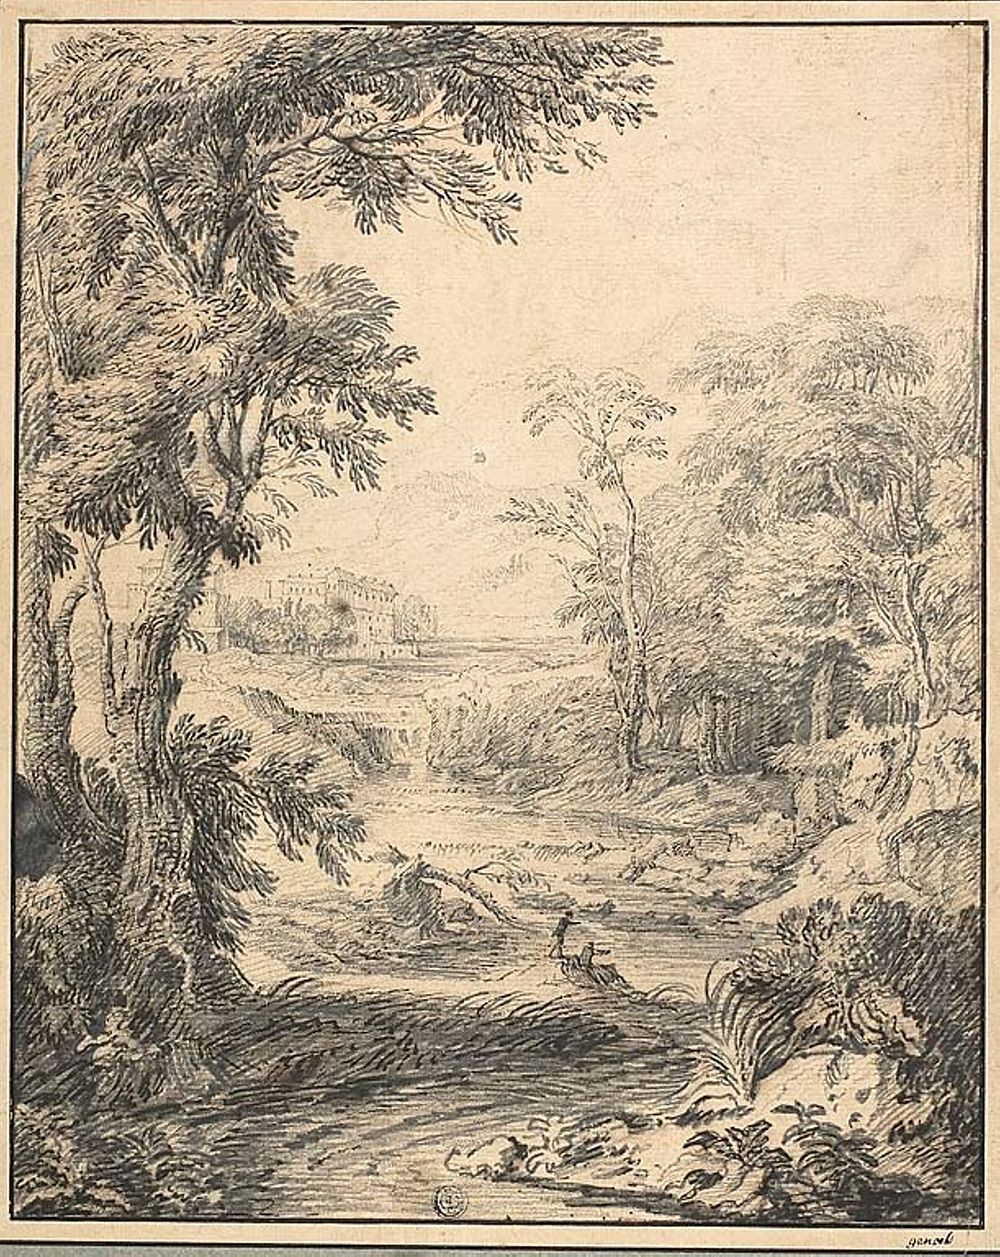 River Landscape with Two Figures in Foreground, Castle in Distance by Abraham Genoels, II